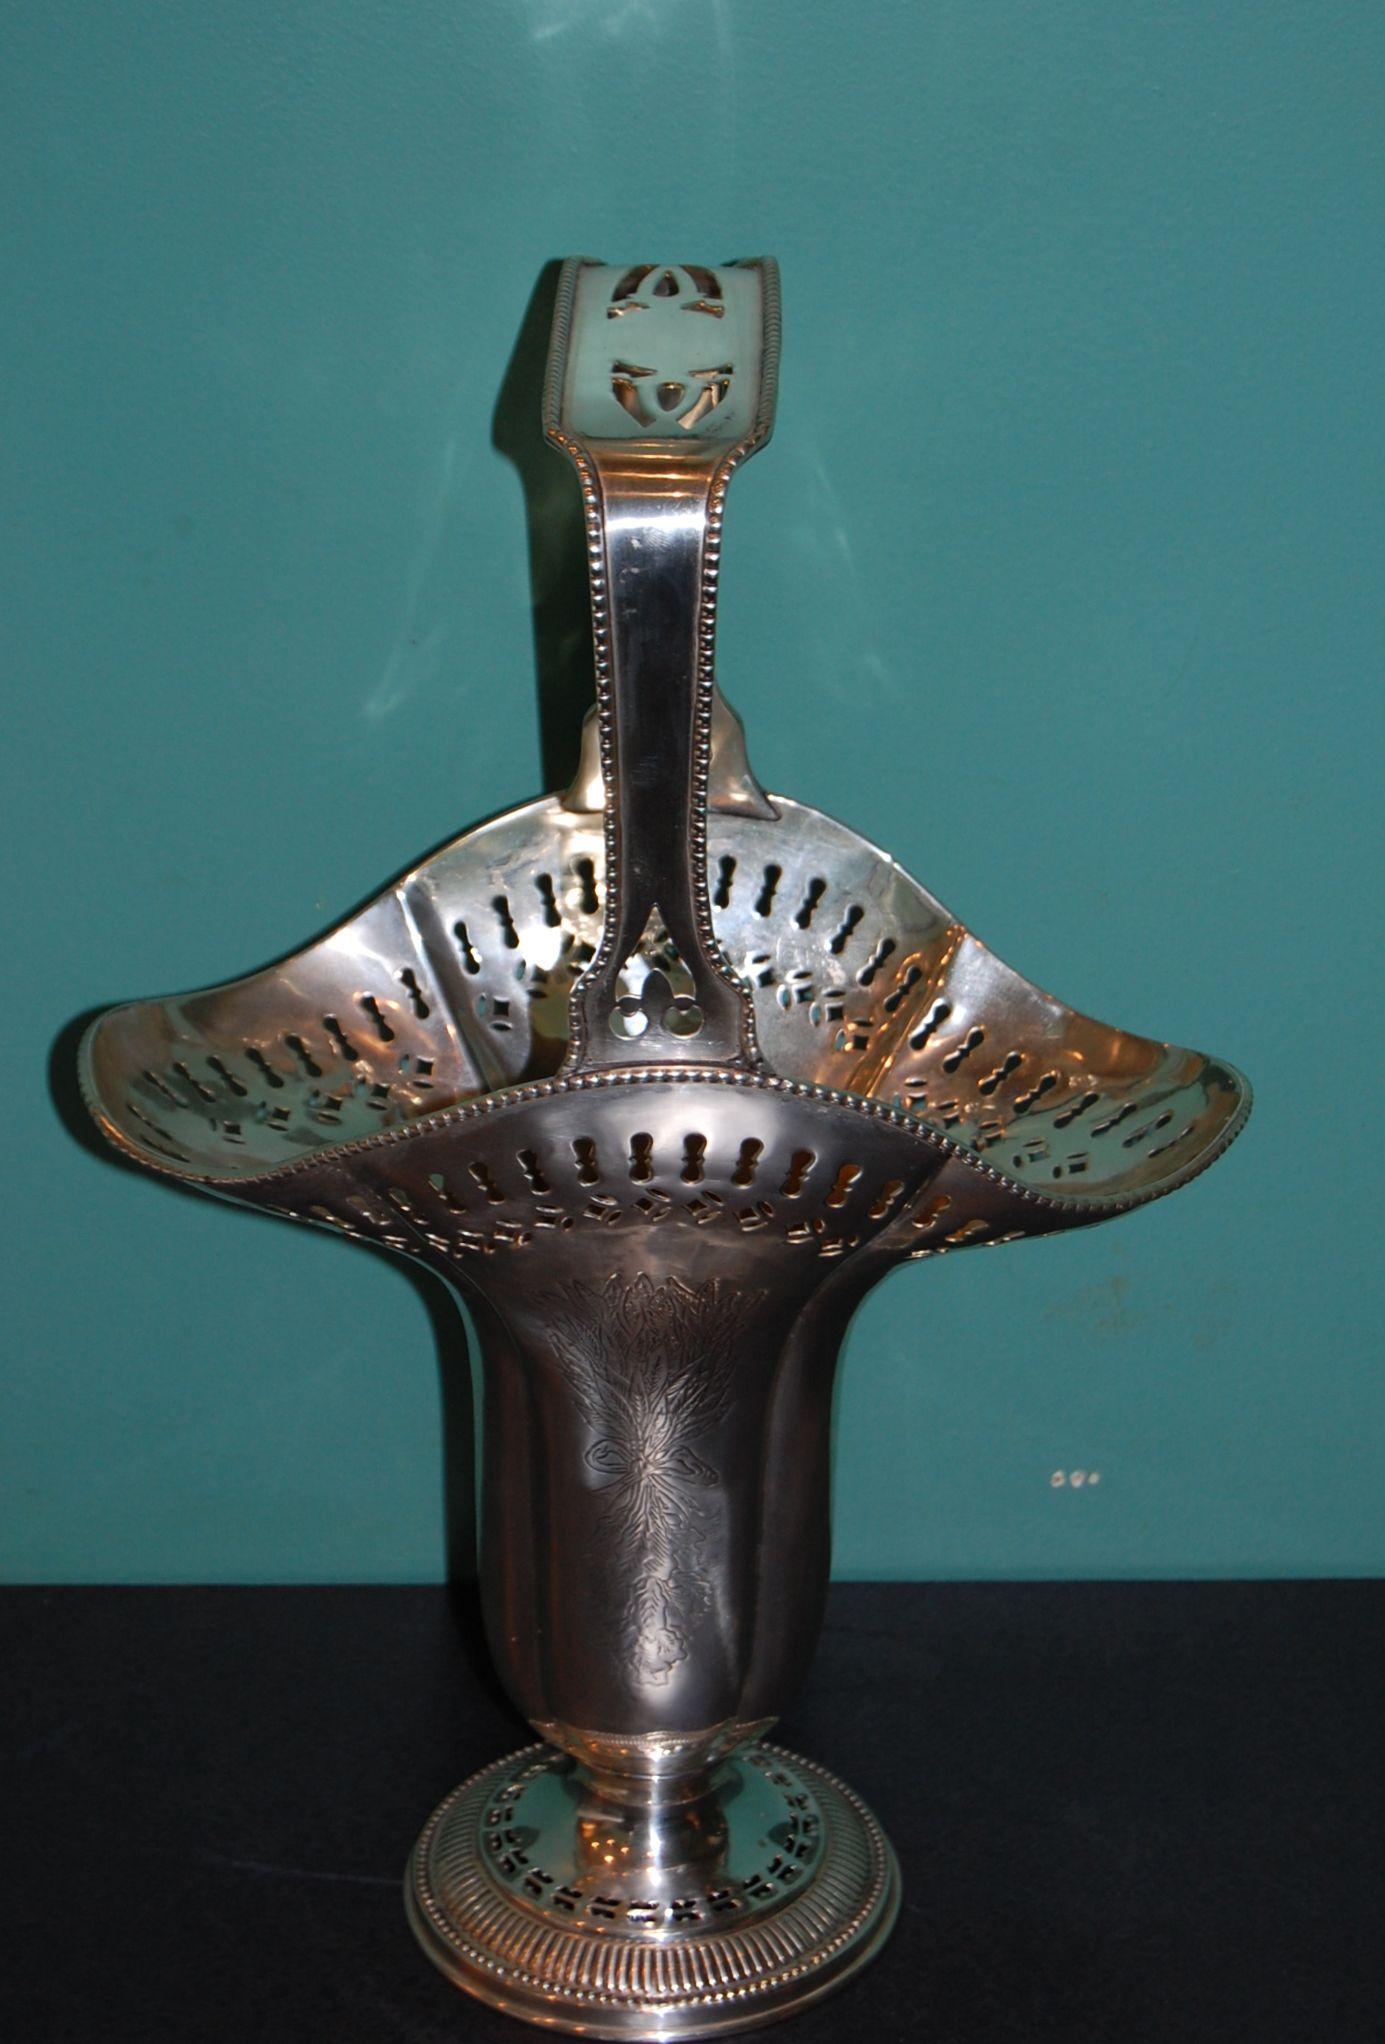 A fanciful silver plated vase with handle in very good condition recently polished and lacquered. The rim and the base have cut-outs and the front and back have engravings.